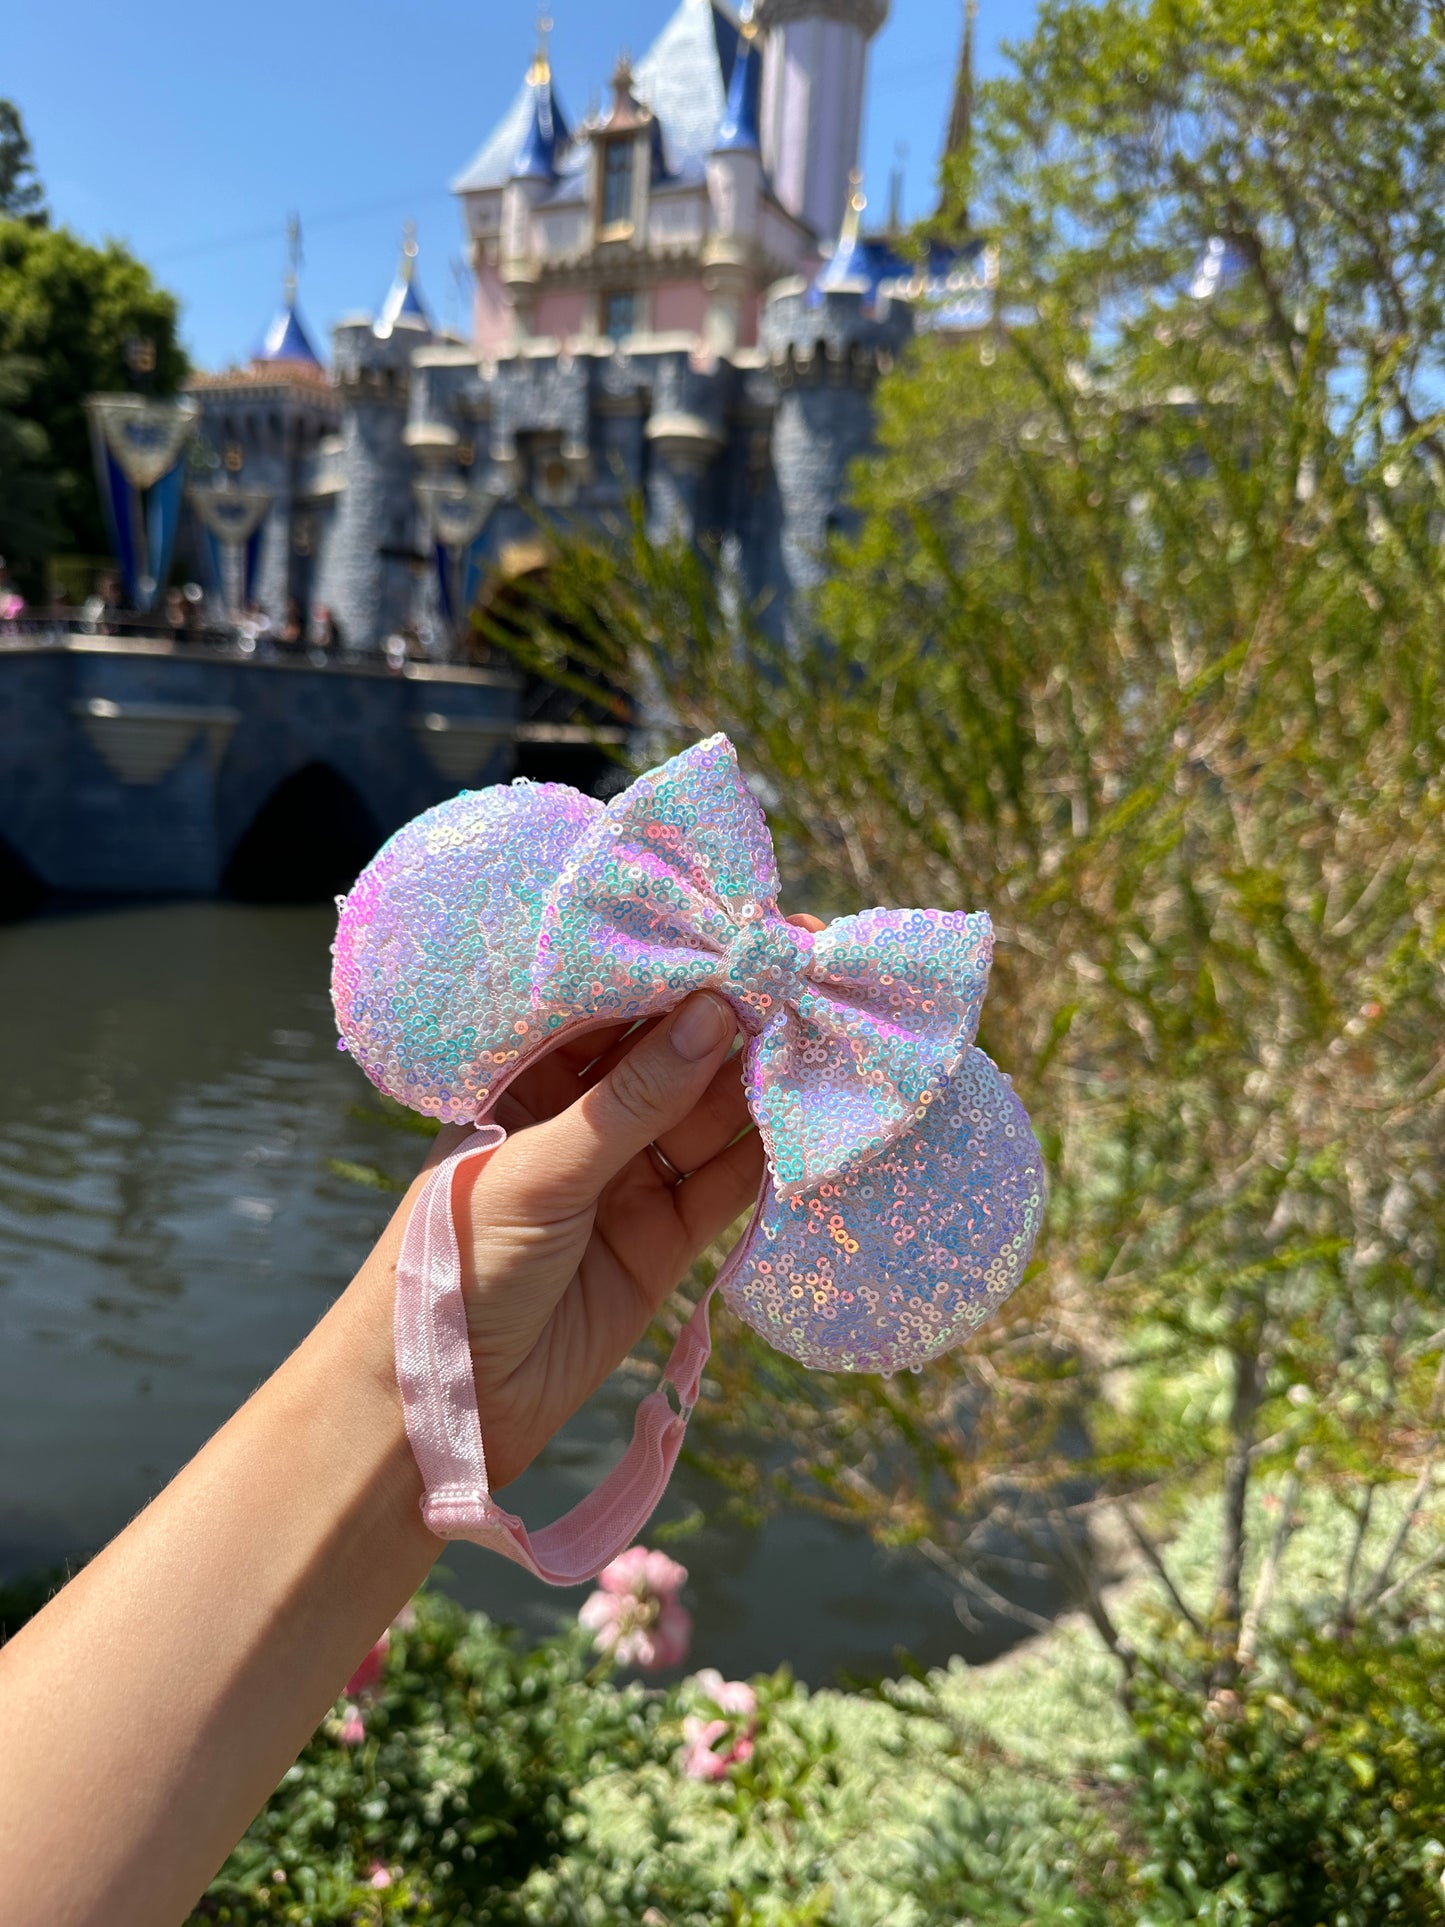 Baby/Child Pink Iridescent Sequin Mouse Ears!